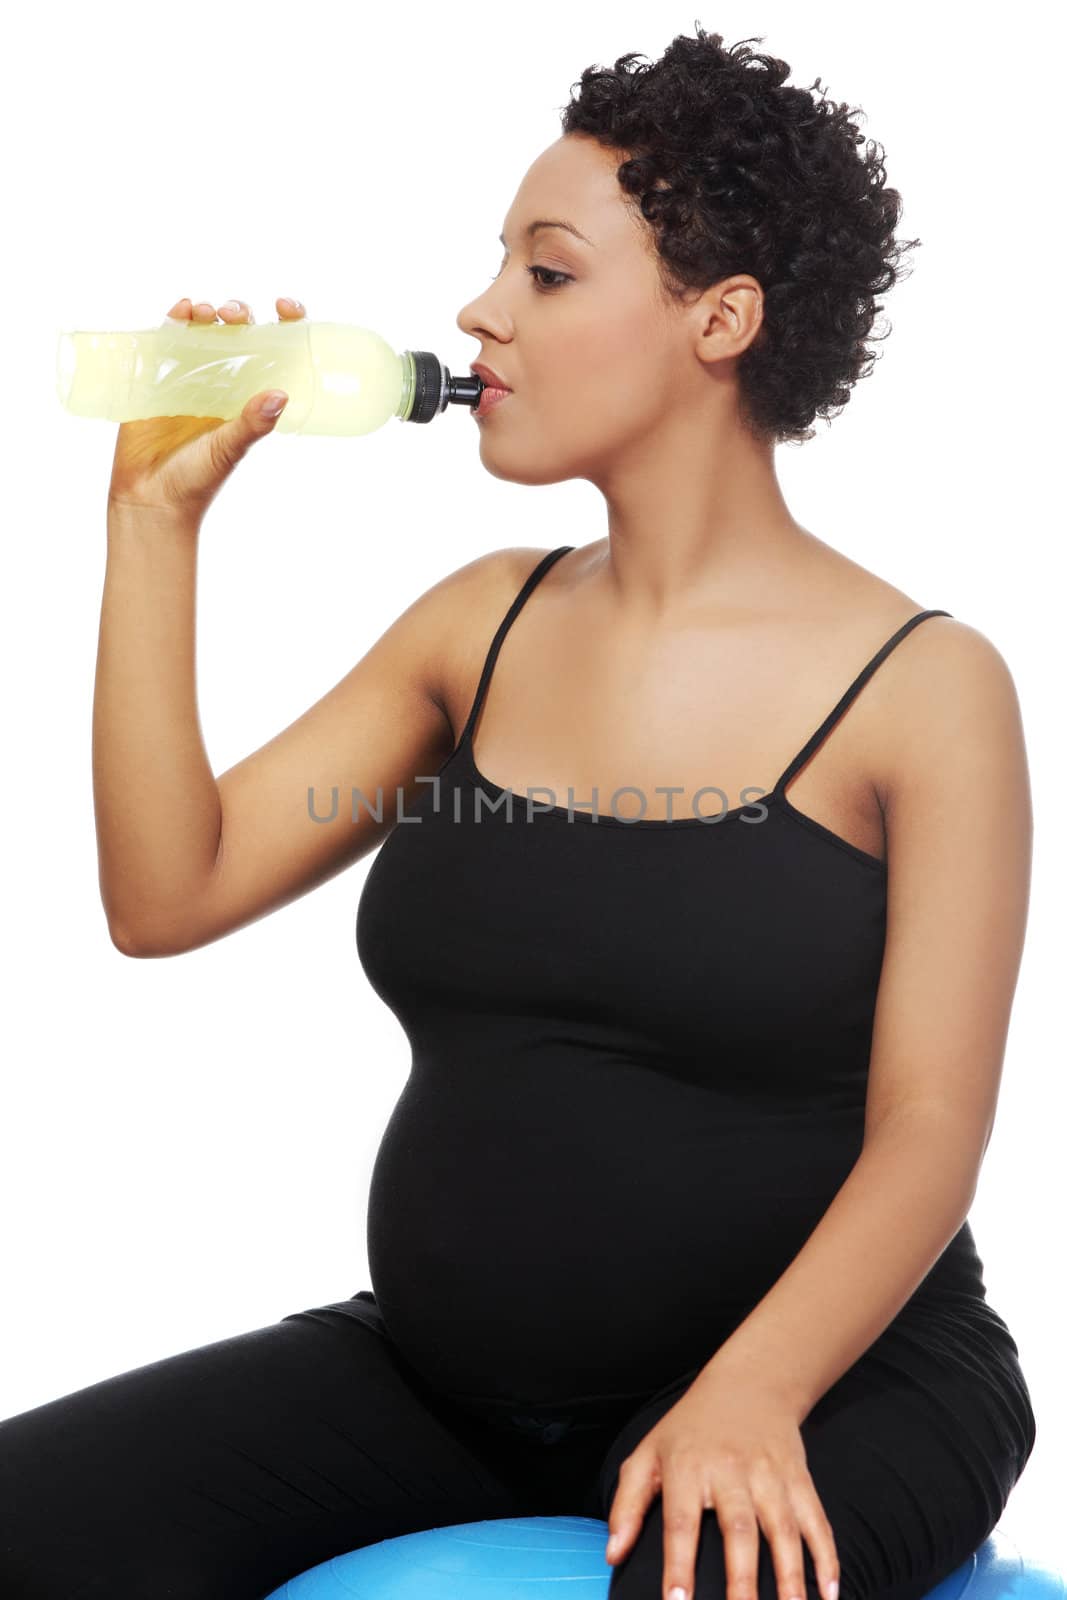 Site view closeup of a young pregnant woman sitting on a blue ball, drinking an energy potion, isolated on a white background.